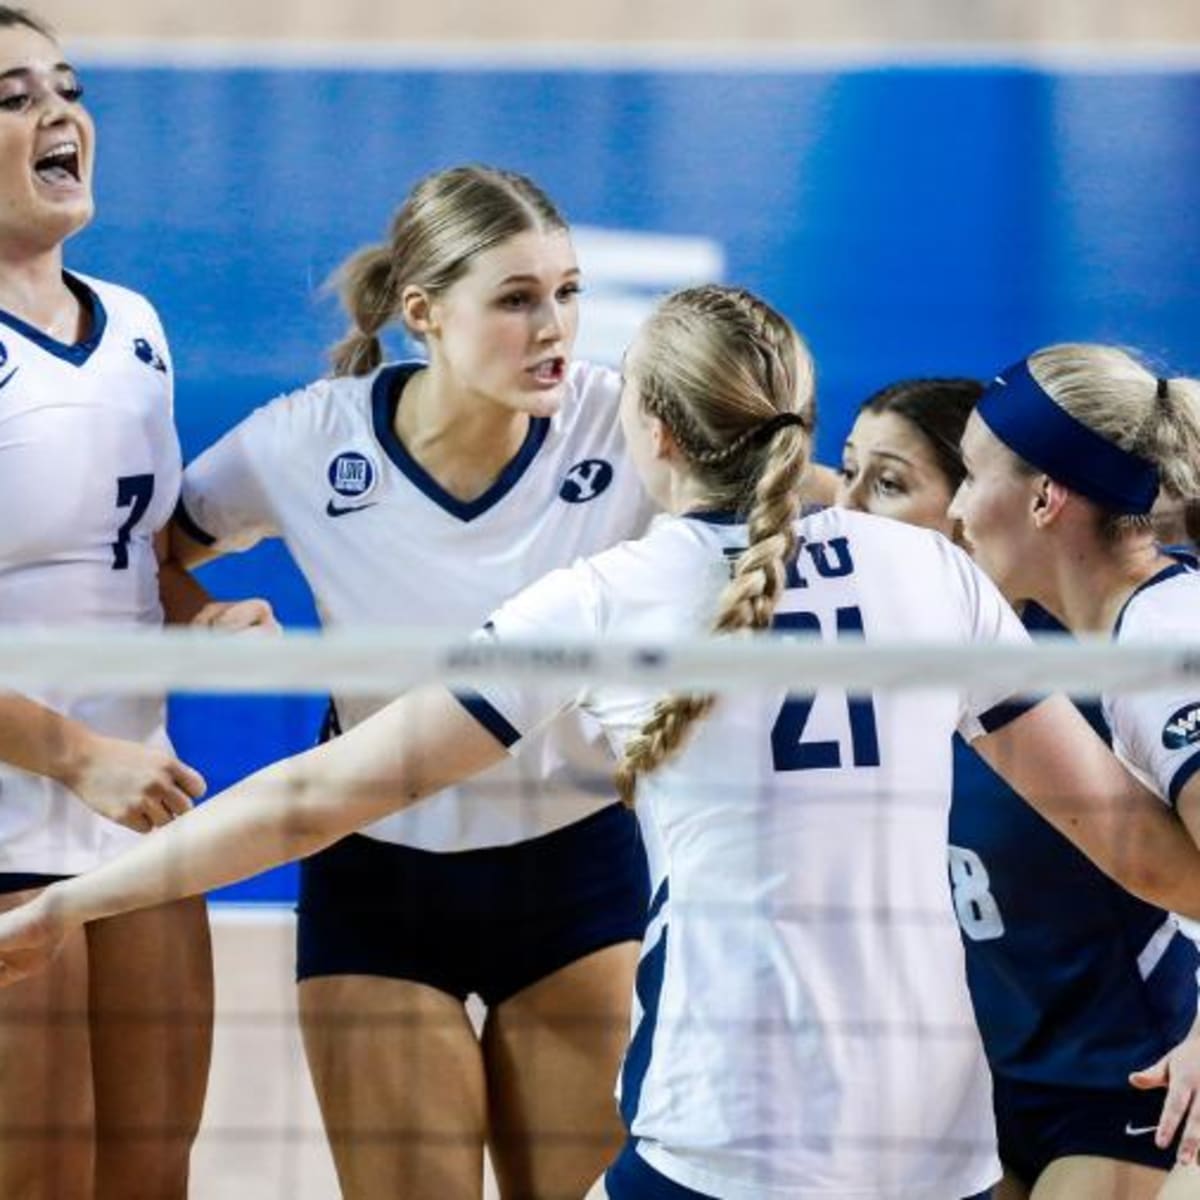 Ohio State at Penn State Free Live Stream Womens Volleyball - How to Watch and Stream Major League and College Sports